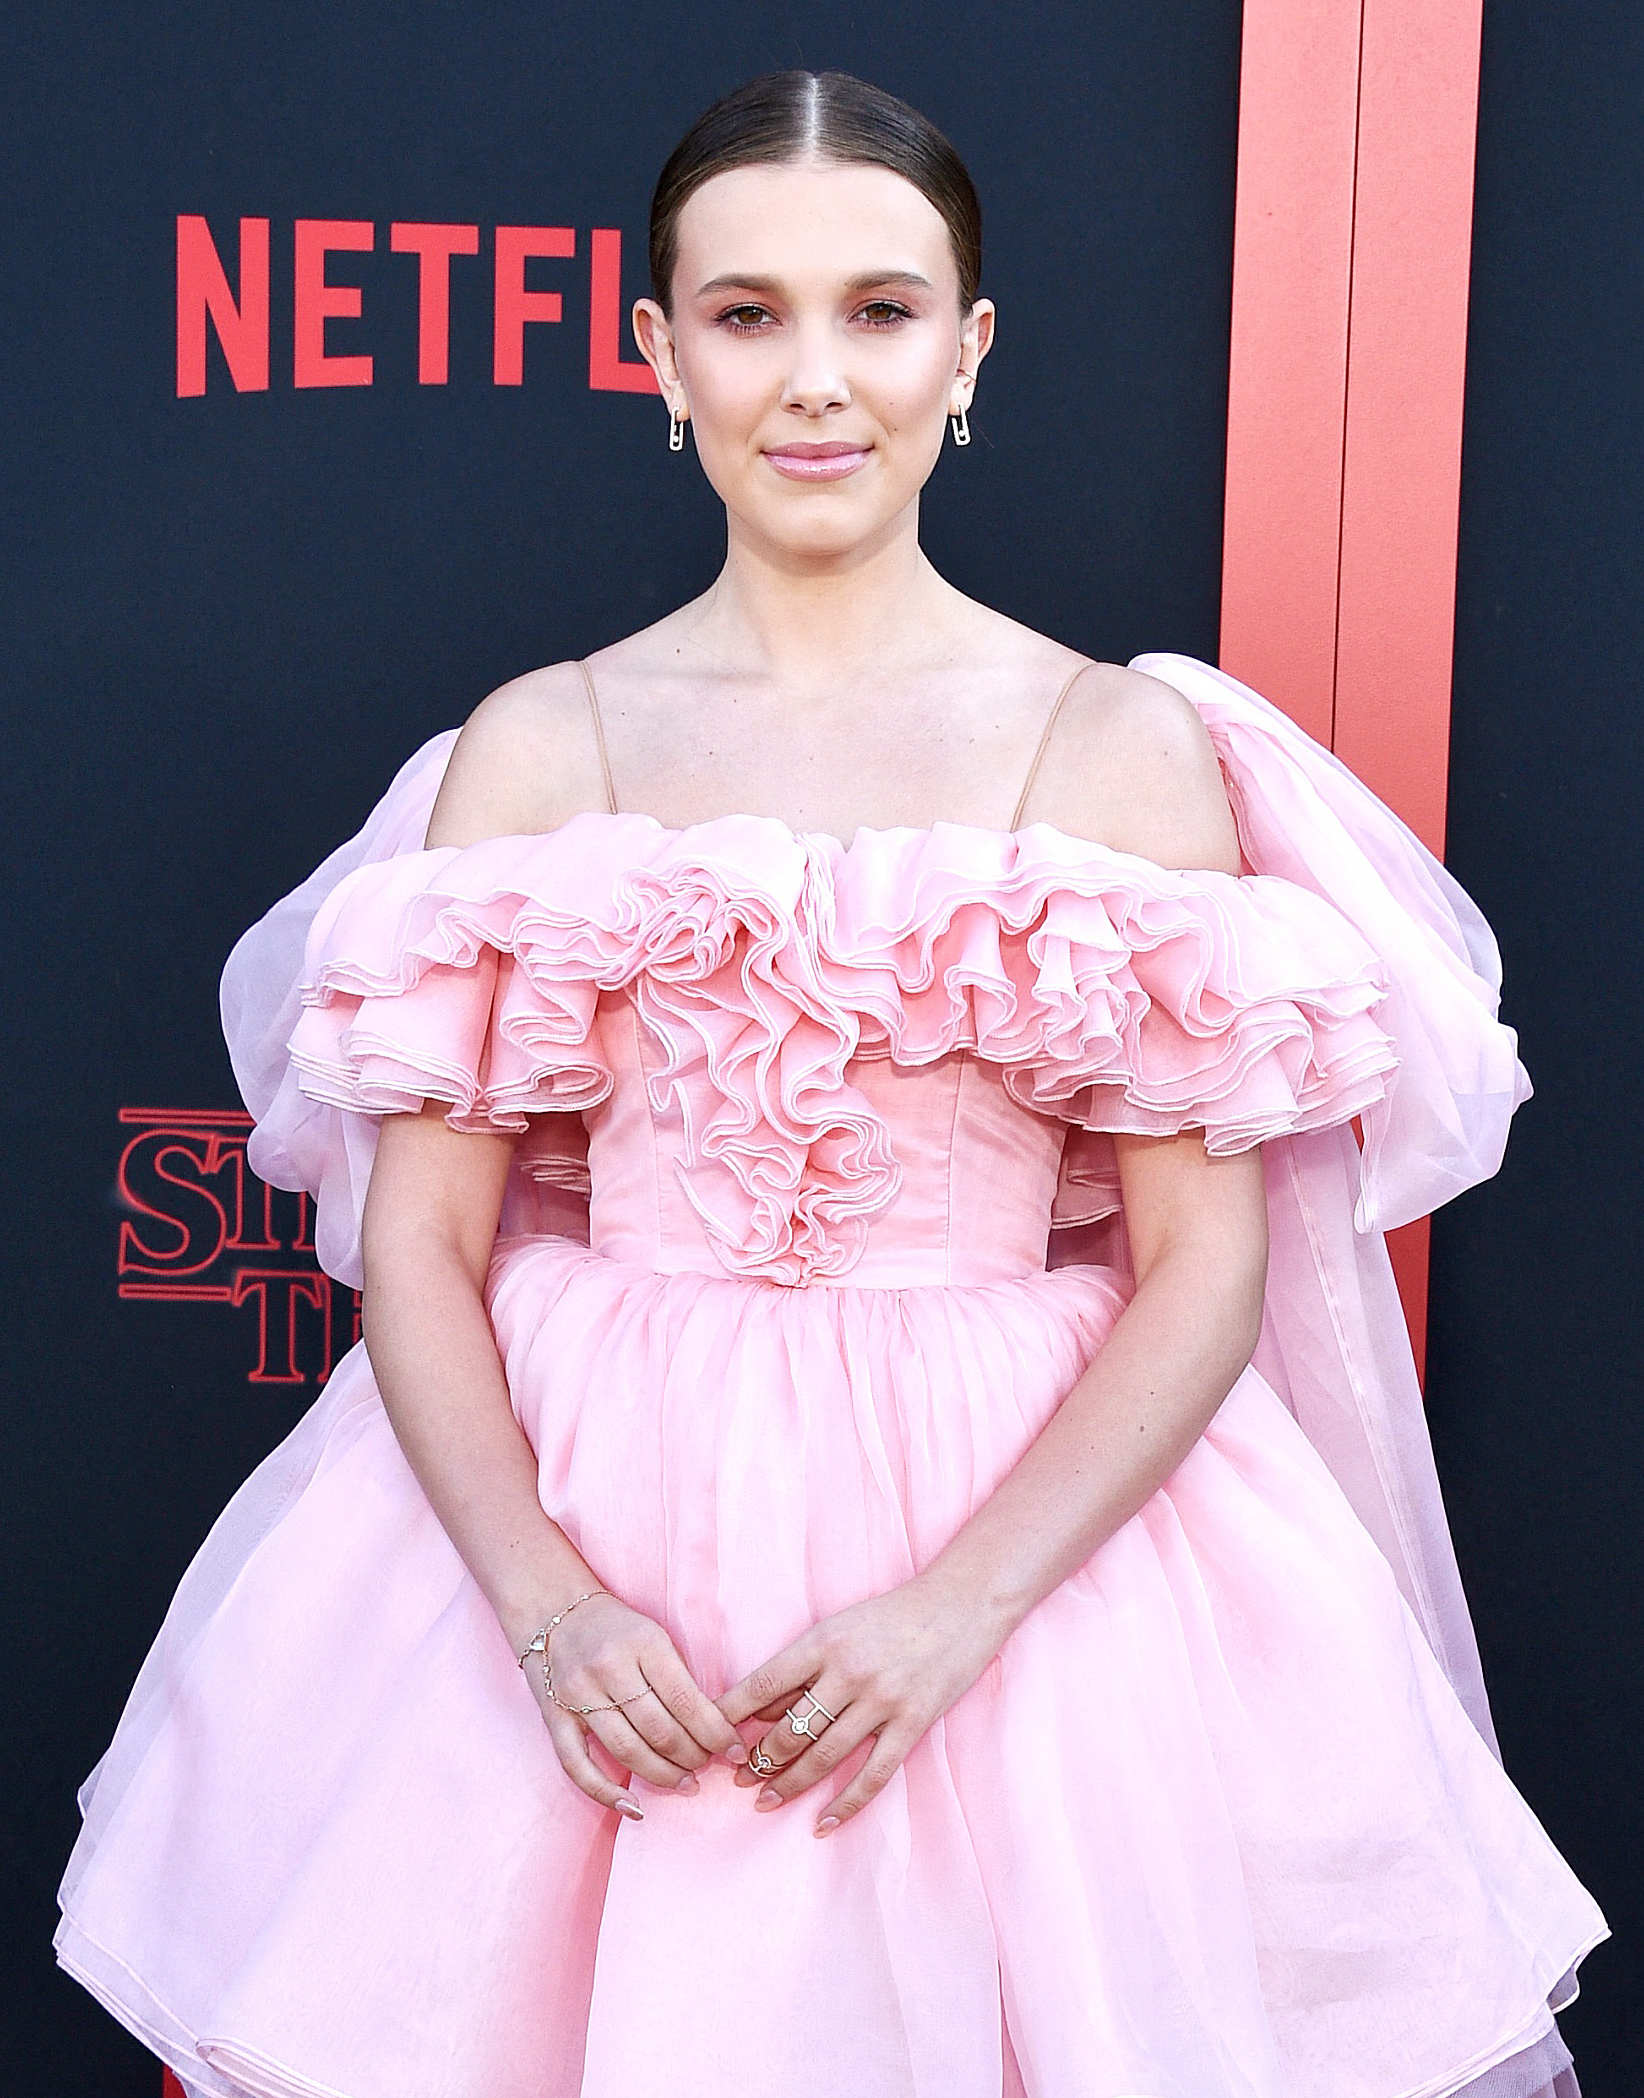 Millie Bobby Brown just matched her outfit to her beauty brand and